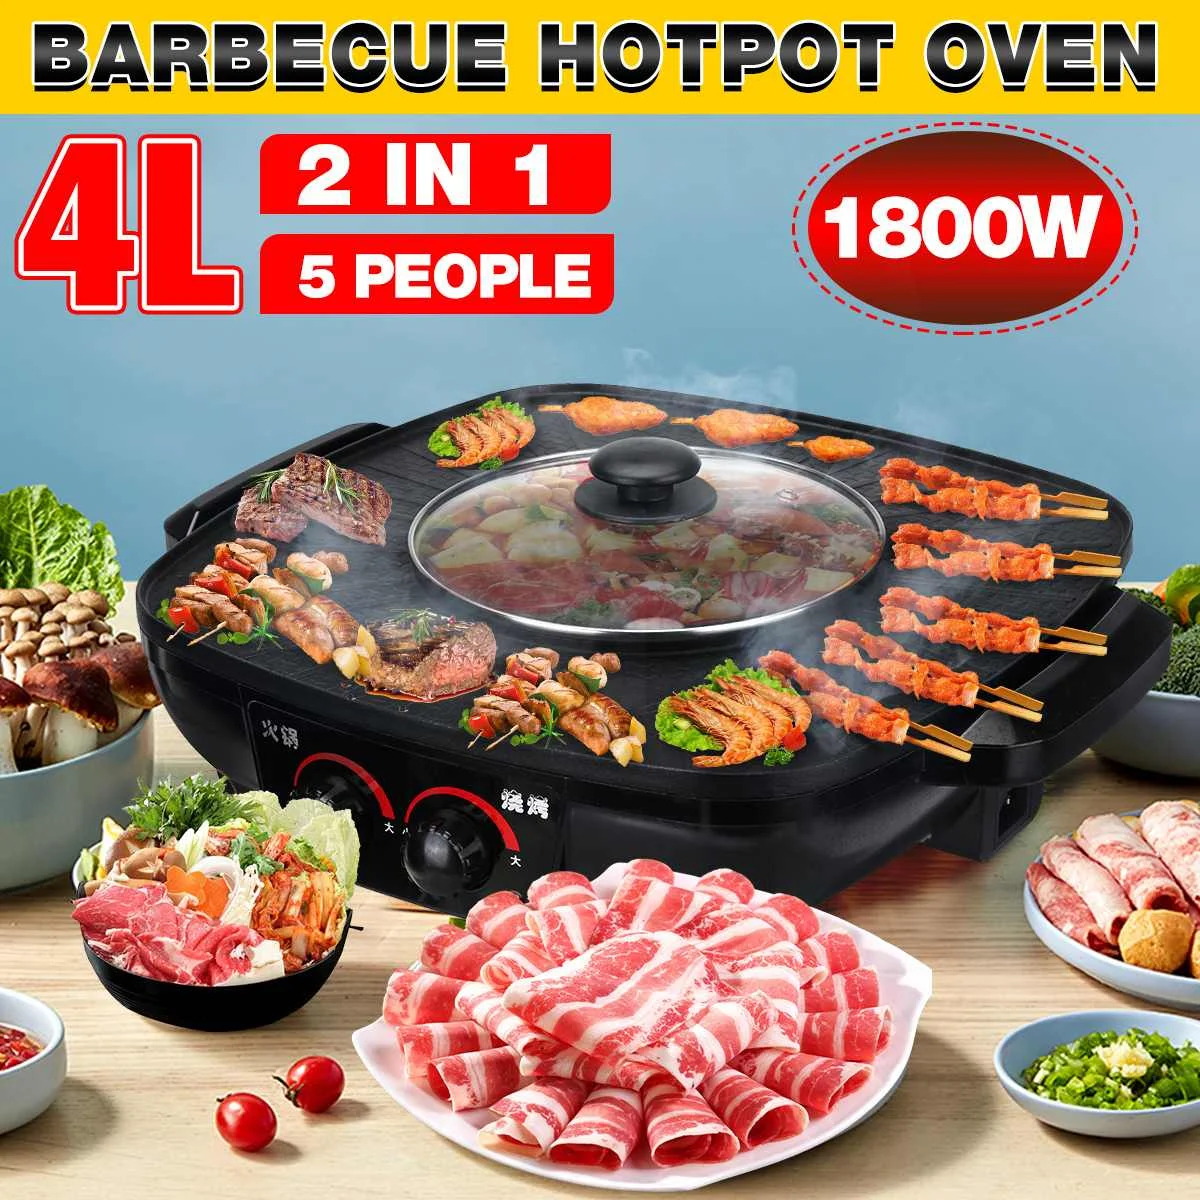 

1800W 220V 2 In 1 Electric Hot Pot Oven Smokeless Barbecue Machine Home Non-Stick BBQ Grill Roast Meat Dish Plate Multi Cooker